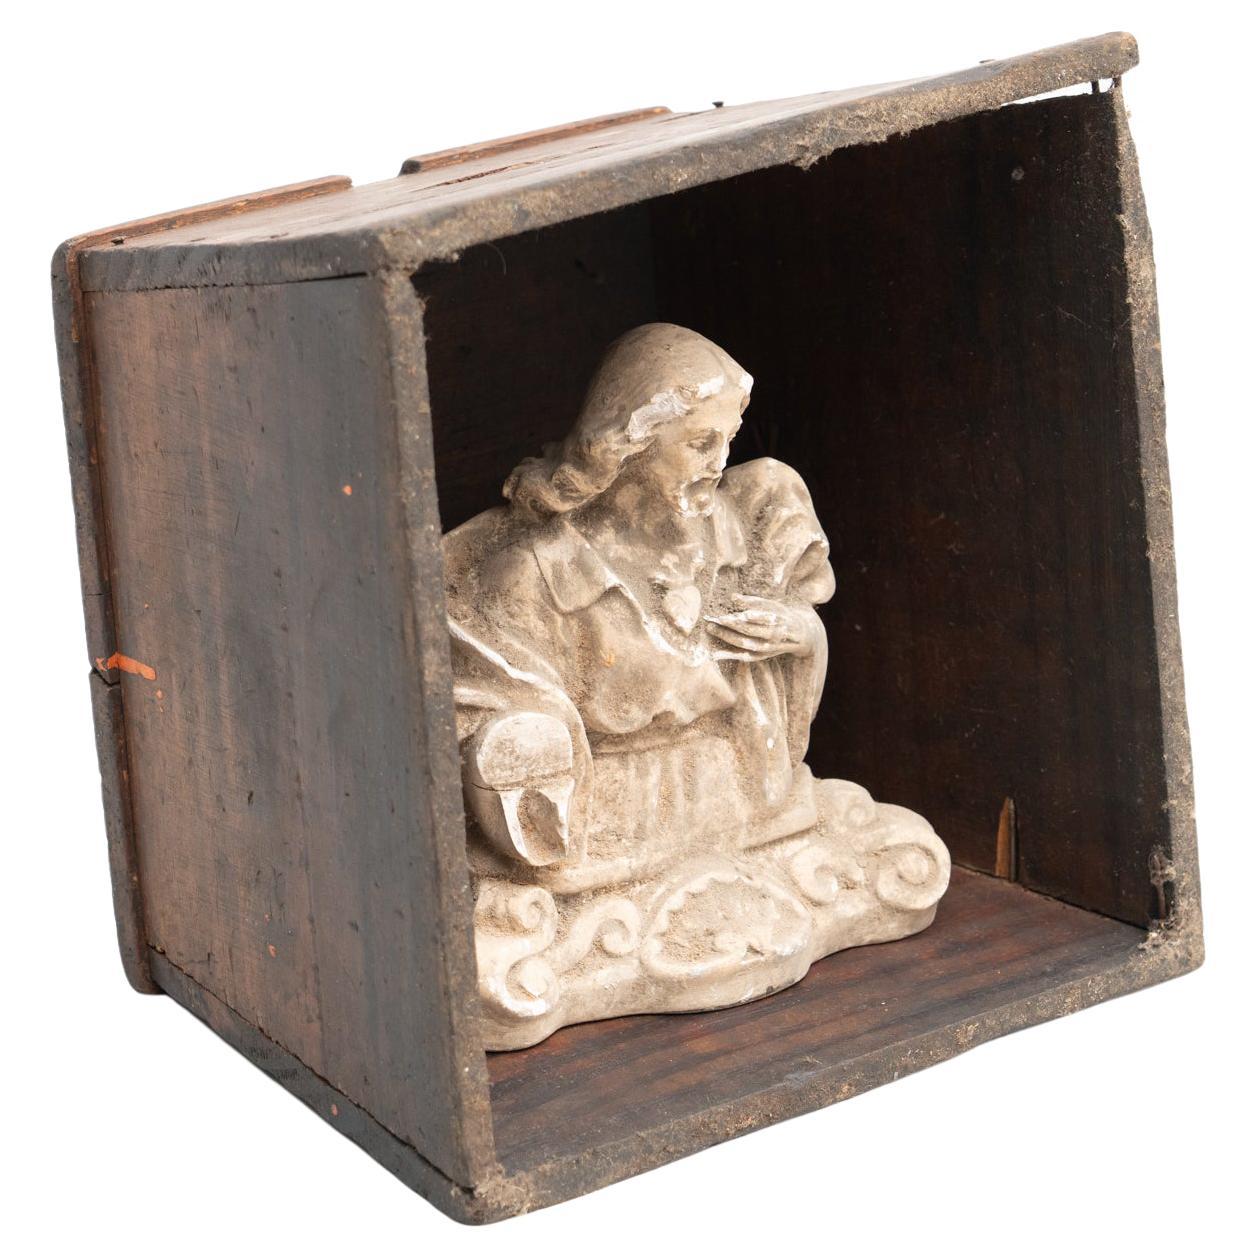 Wooden Traditional Figure in a Niche of a Saint, circa 1950